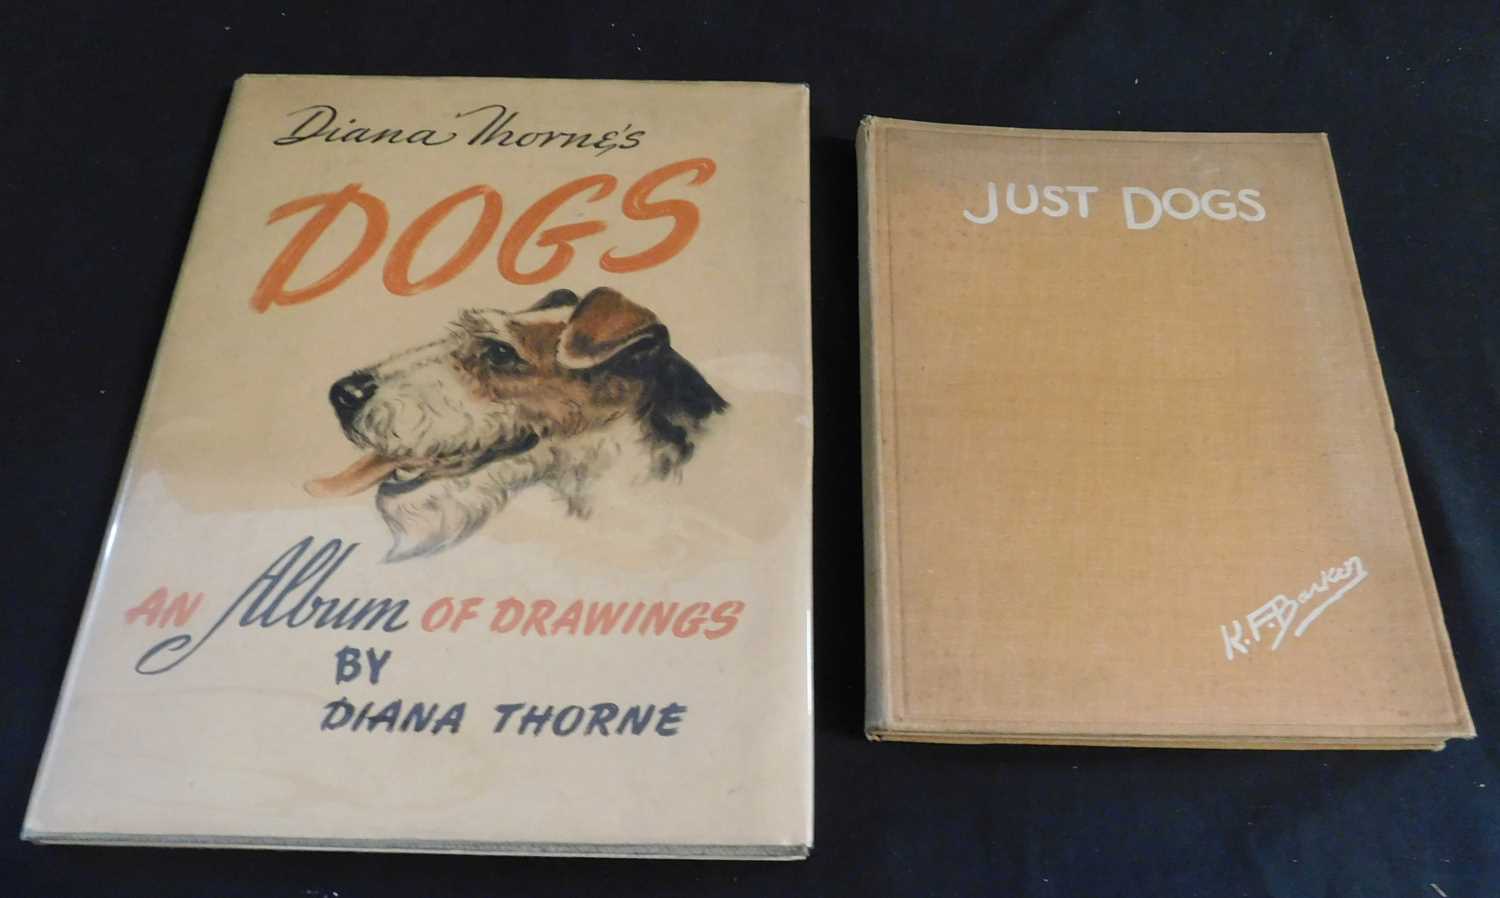 DIANA THORNE: DIANA THORNE'S DOGS AN ALBUM OF DRAWINGS, New York, Julian Messner, 1944, 1st edition,